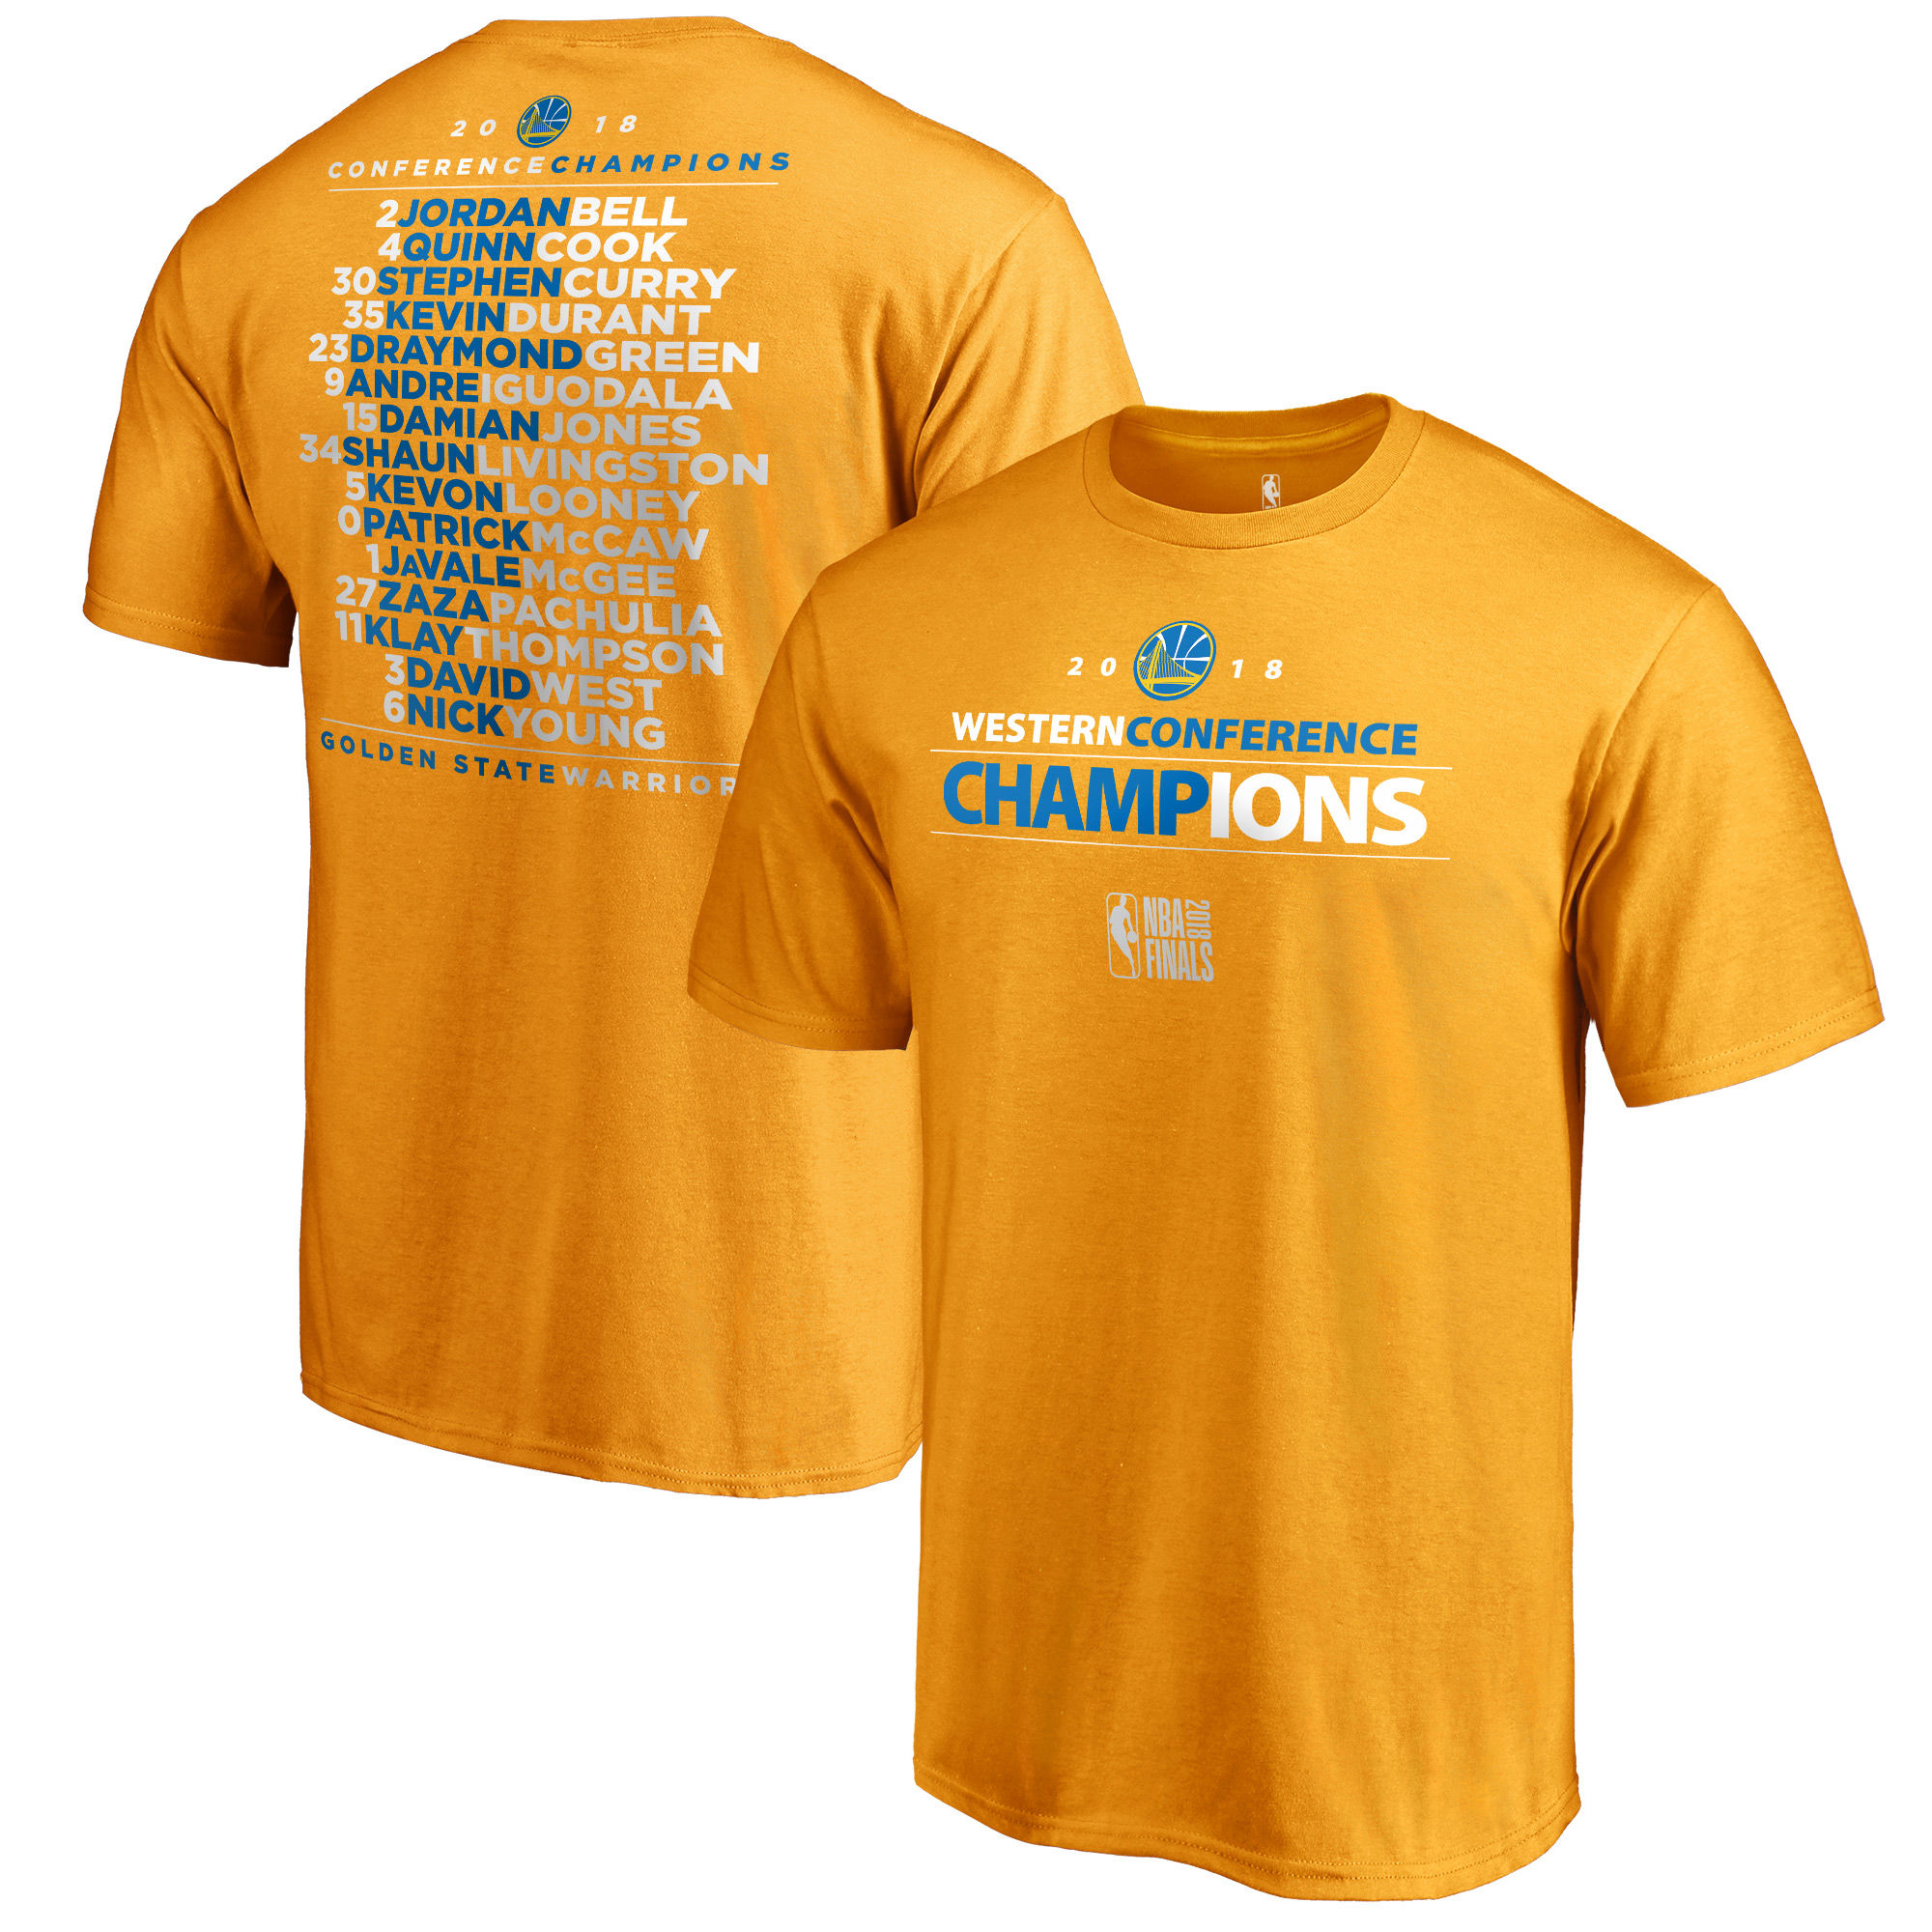 Golden State Warriors Fanatics Branded 2018 Western Conference Champions Backcourt Roster T-Shirt Gold